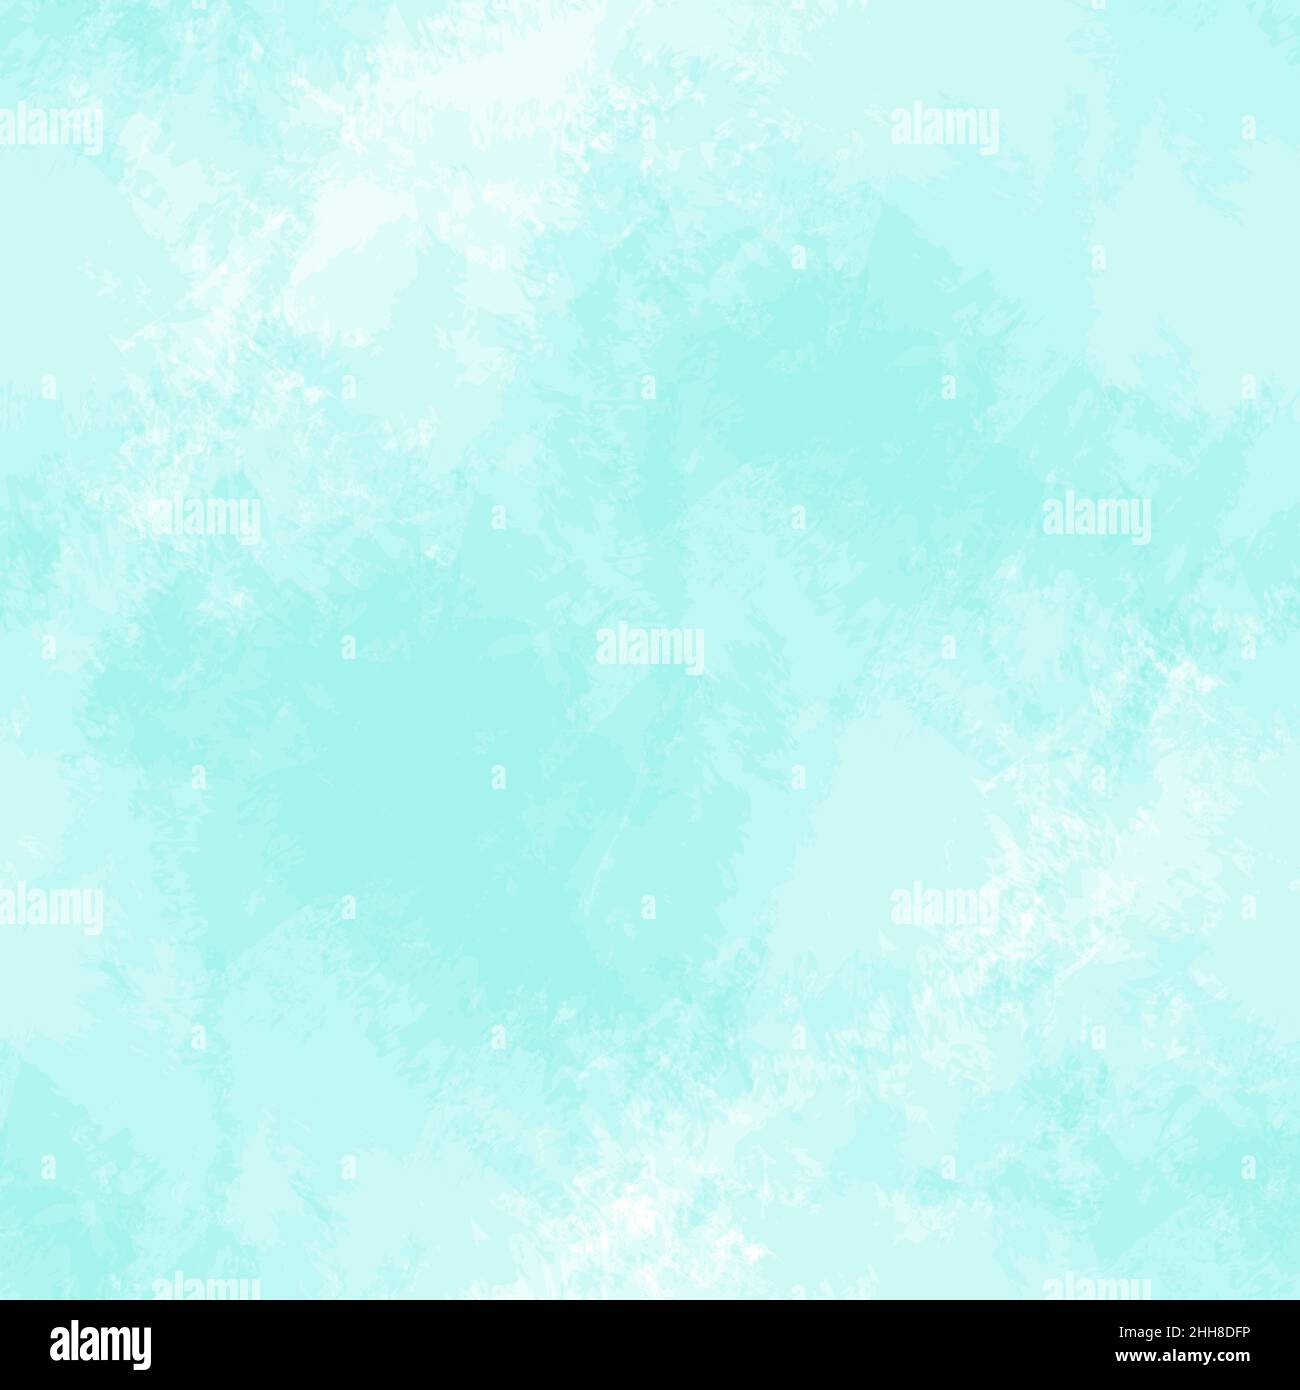 Vector background. Seamless watercolor texture pattern for your creativity. Stock Vector